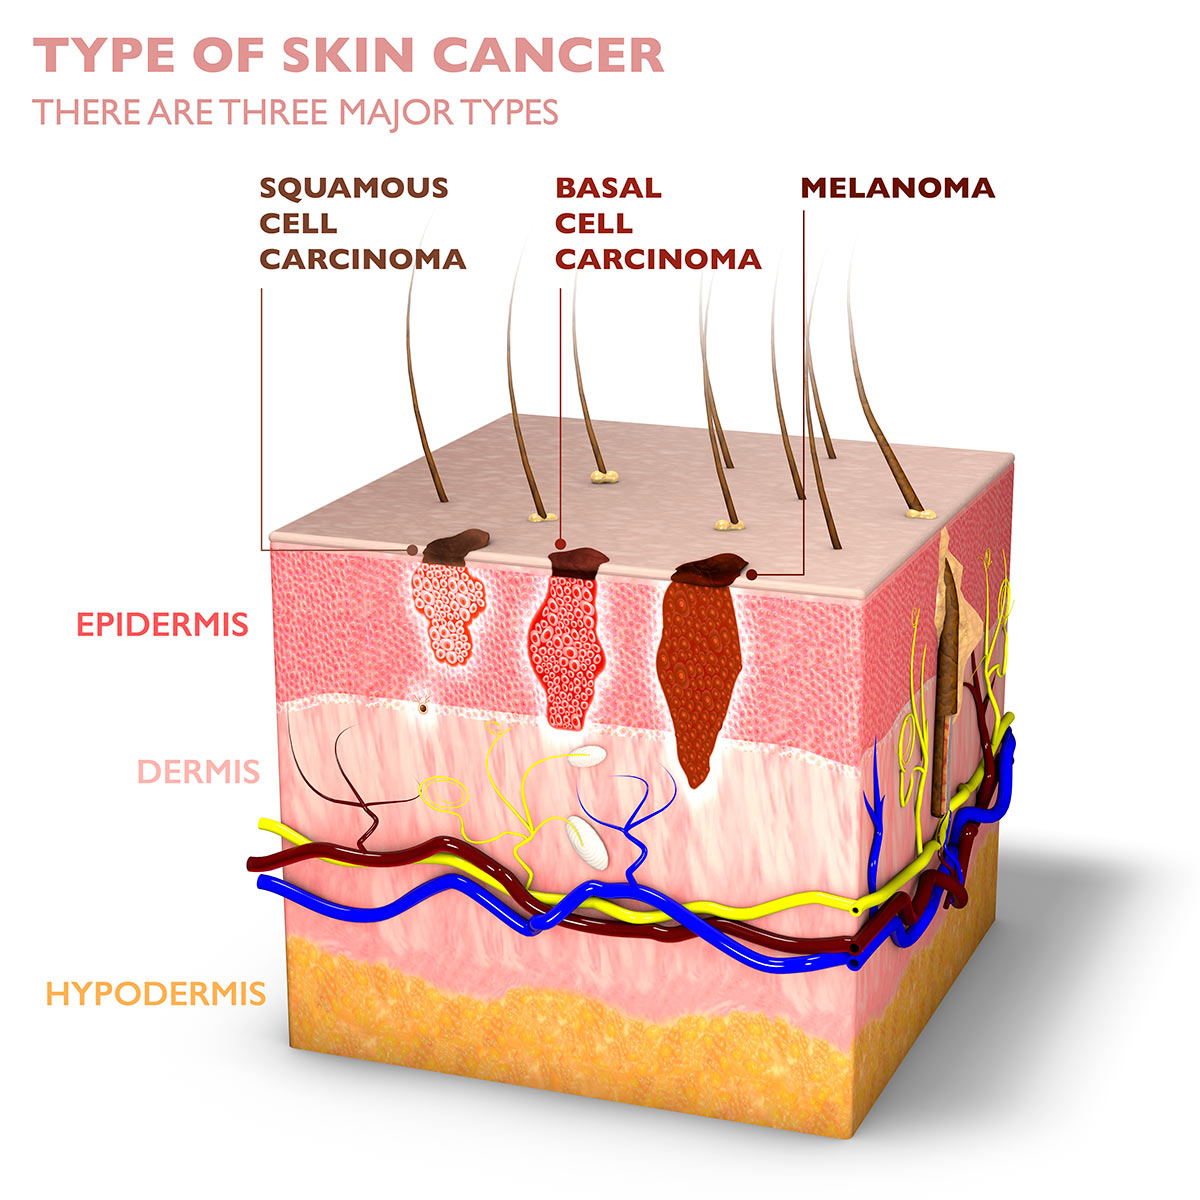 An illustration of a cross section of human skin, showing three types of skin cancer and how deeply they penetrate into the layers of skin.